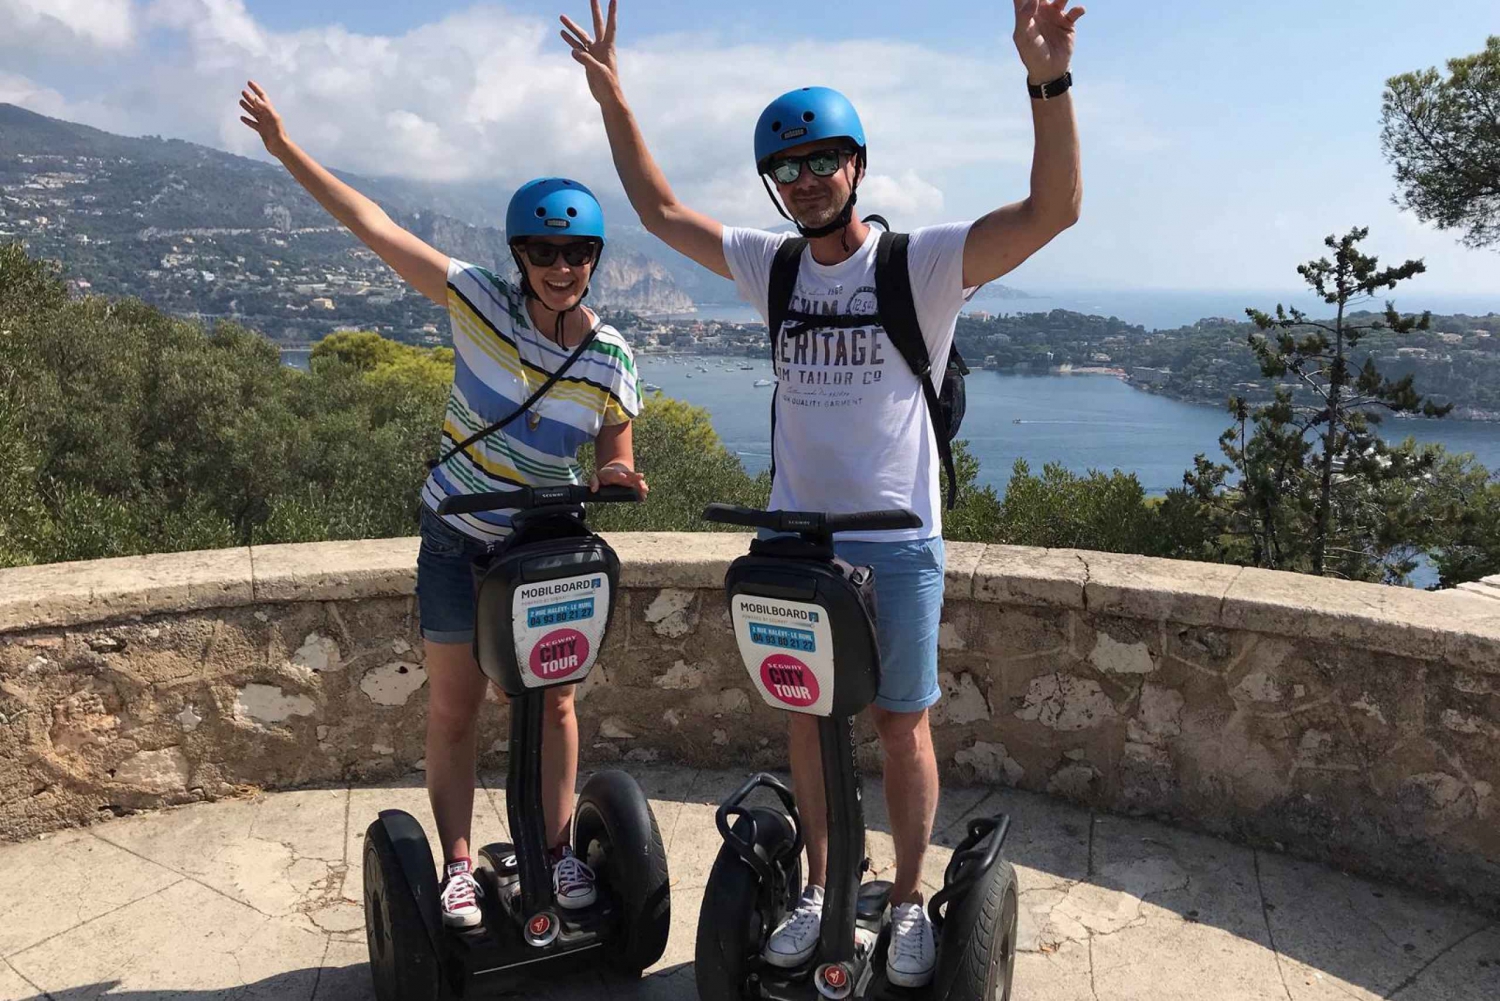 3-Hour Segway Tour to Nice & Villefranche-sur-Mer